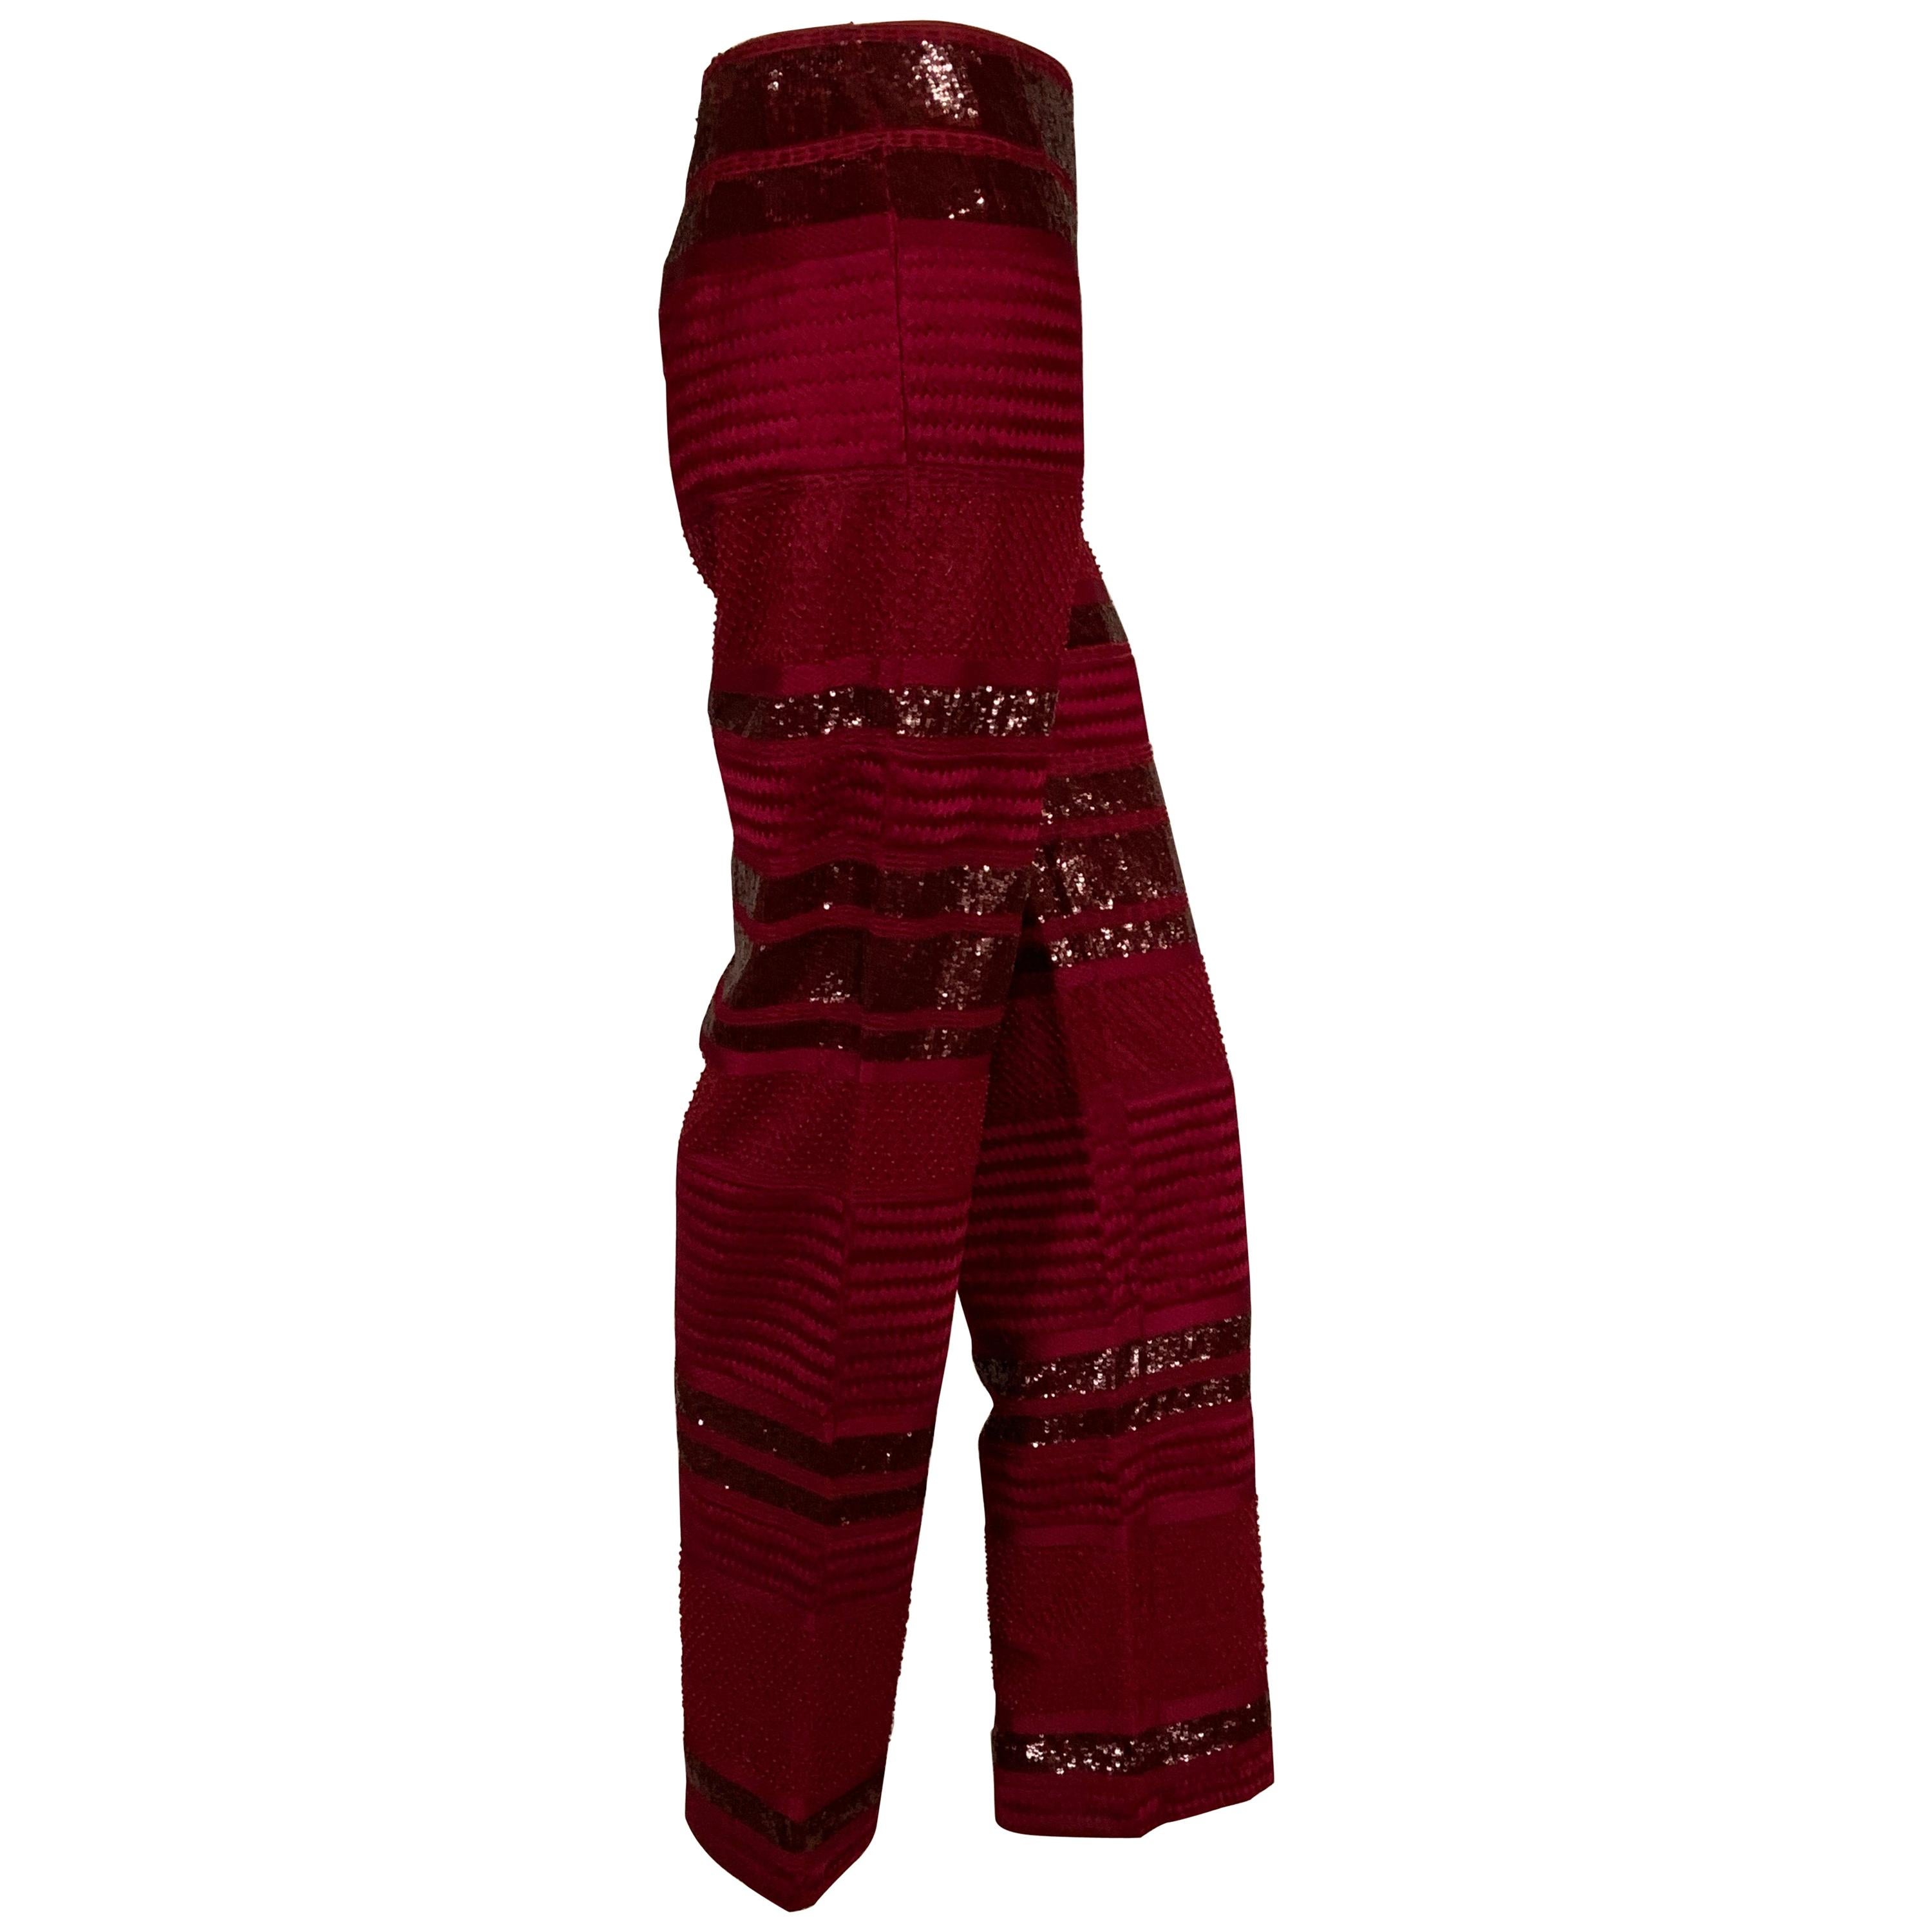 These pants From Chado, Ralph Rucci are all about the fabric, the cut and design of the pants is spare and elegant. No waistband, no pockets, and an invisible left side zipper allows the fabric to be the star. Wine red silk is beaded with wide bands